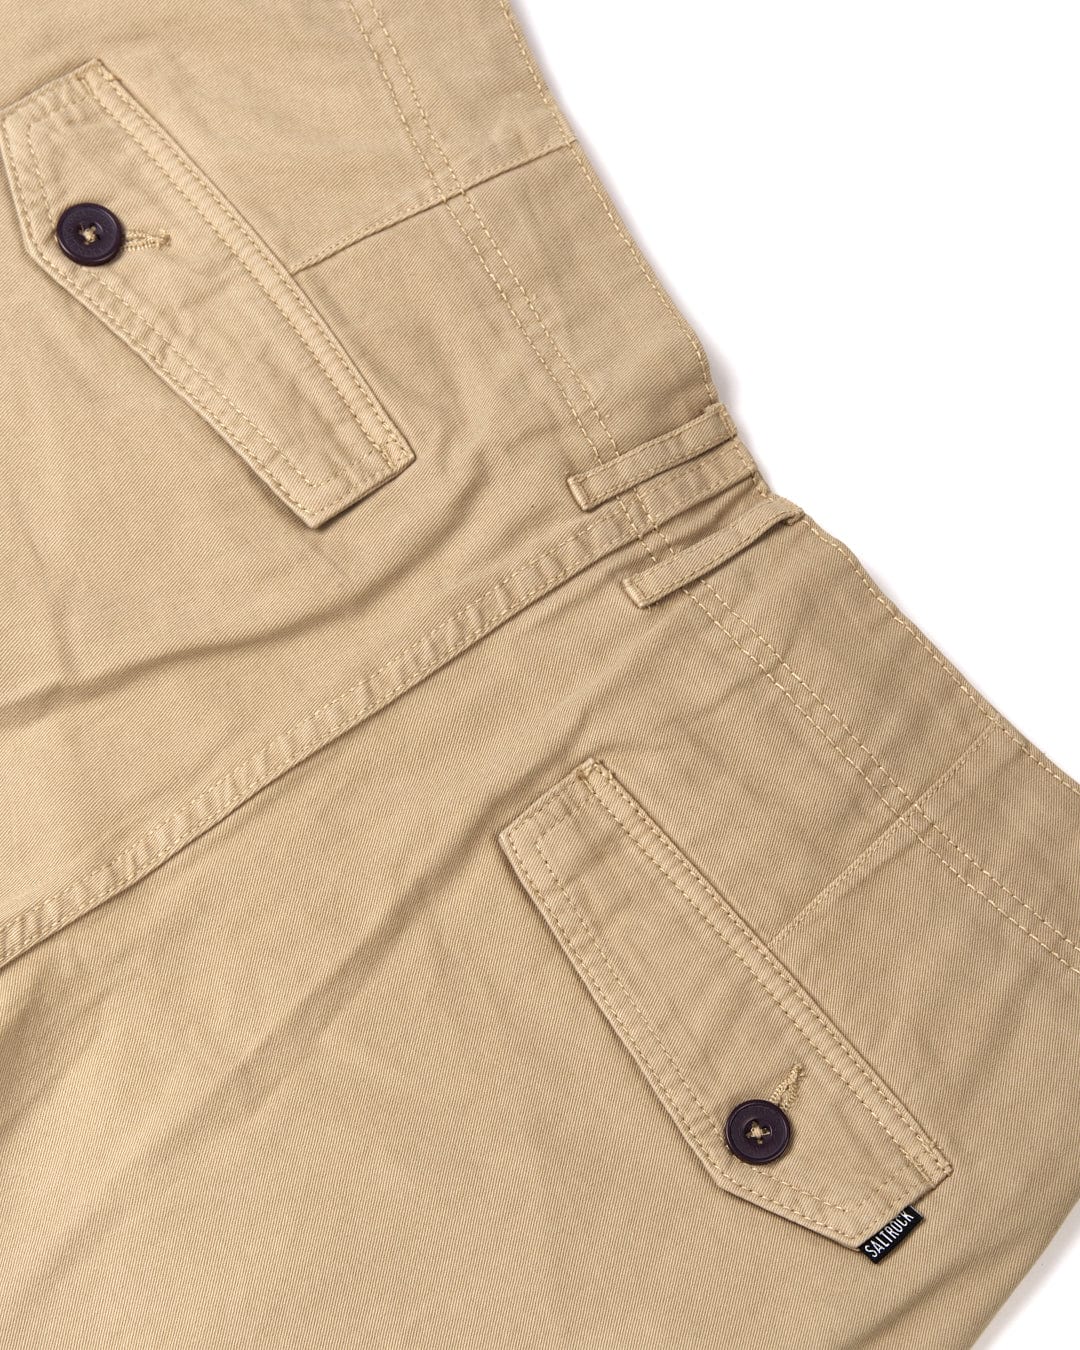 Close-up of Saltrock Penwith II - Mens Cargo Shorts - Cream with buttoned pockets and belt loops, focusing on the texture and details of the cotton material.